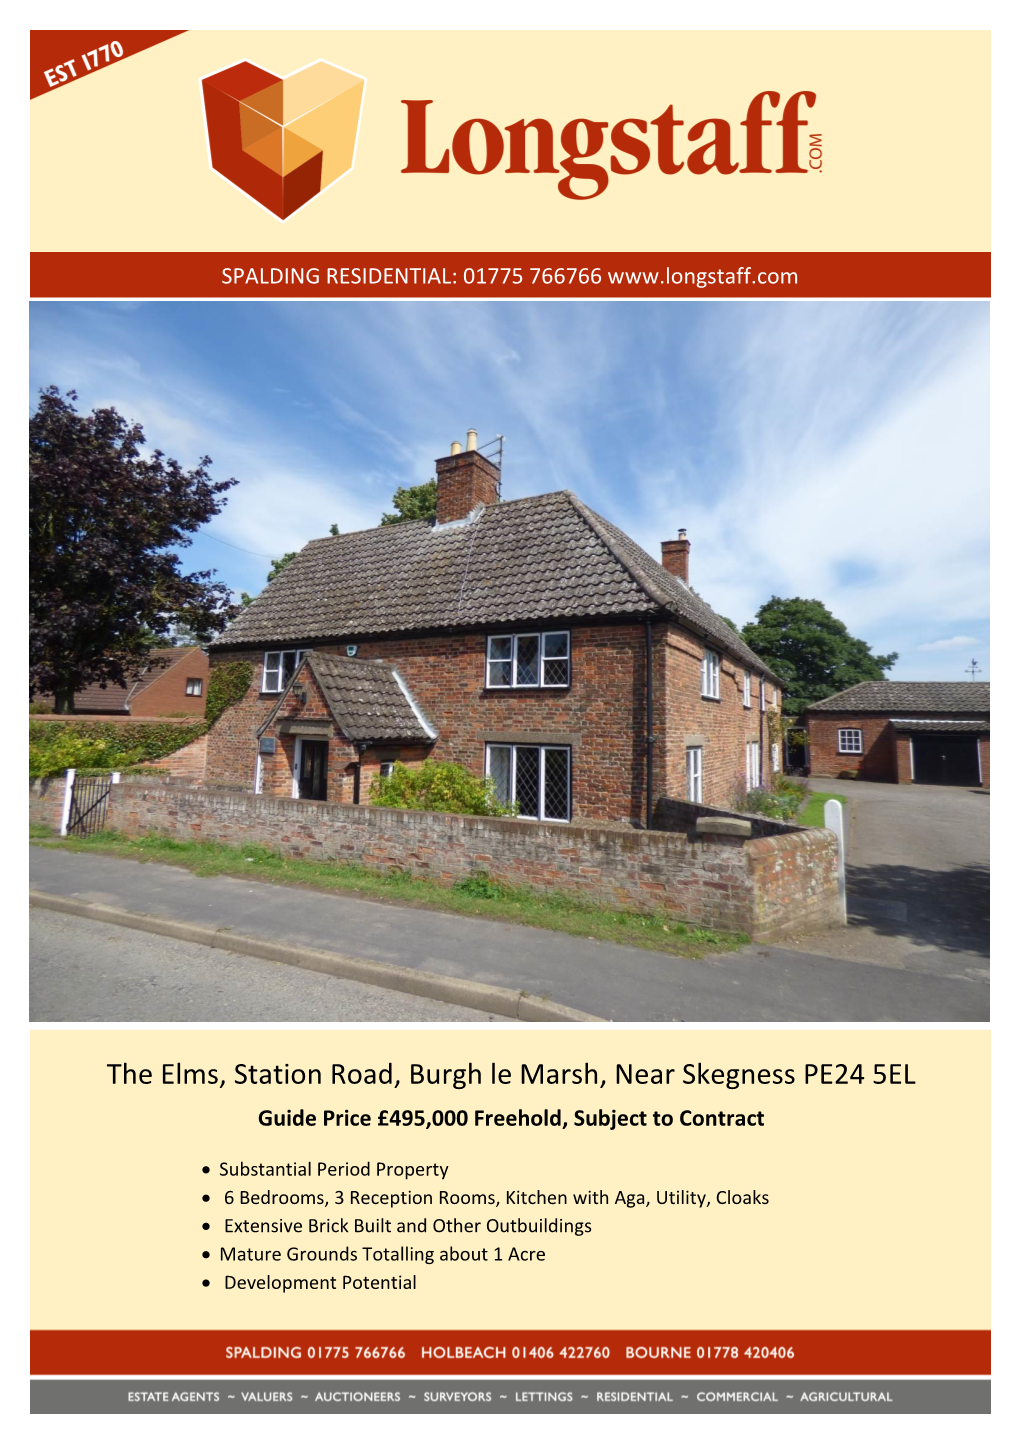 The Elms, Station Road, Burgh Le Marsh, Near Skegness PE24 5EL Guide Price £495,000 Freehold, Subject to Contract